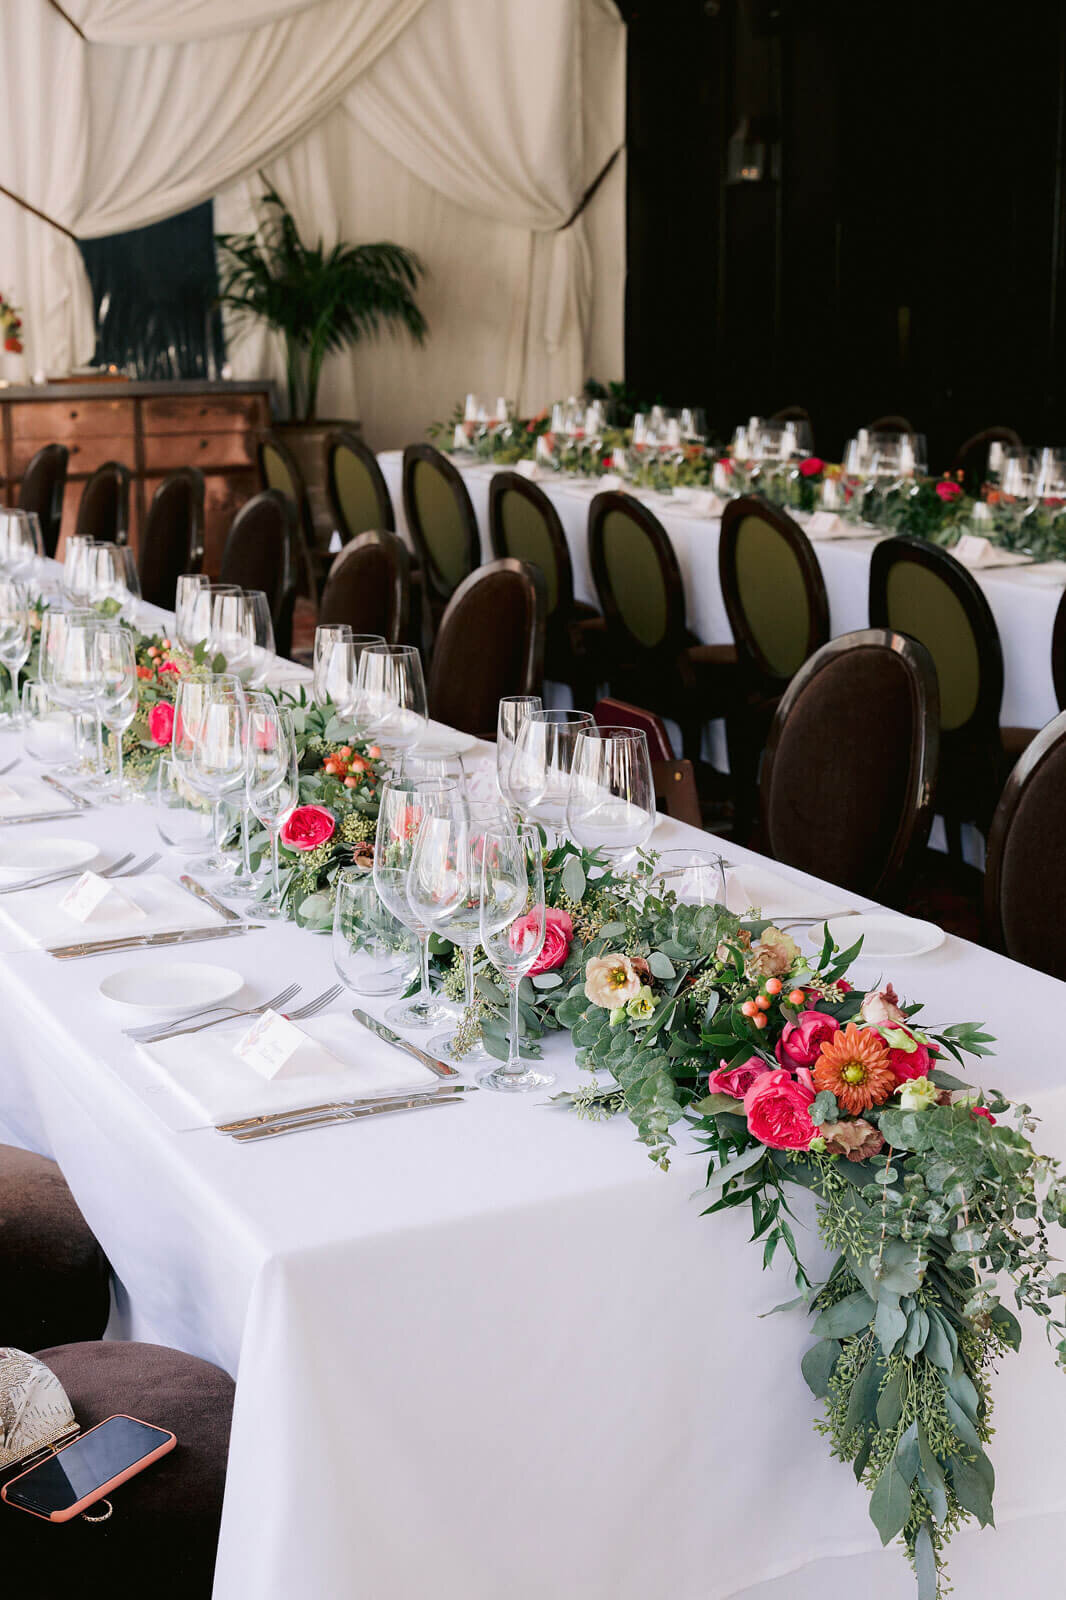 A long wedding dining table with beautiful red, orange, and white flowers and green leaves as the centerpiece. Image by Jenny Fu Studio